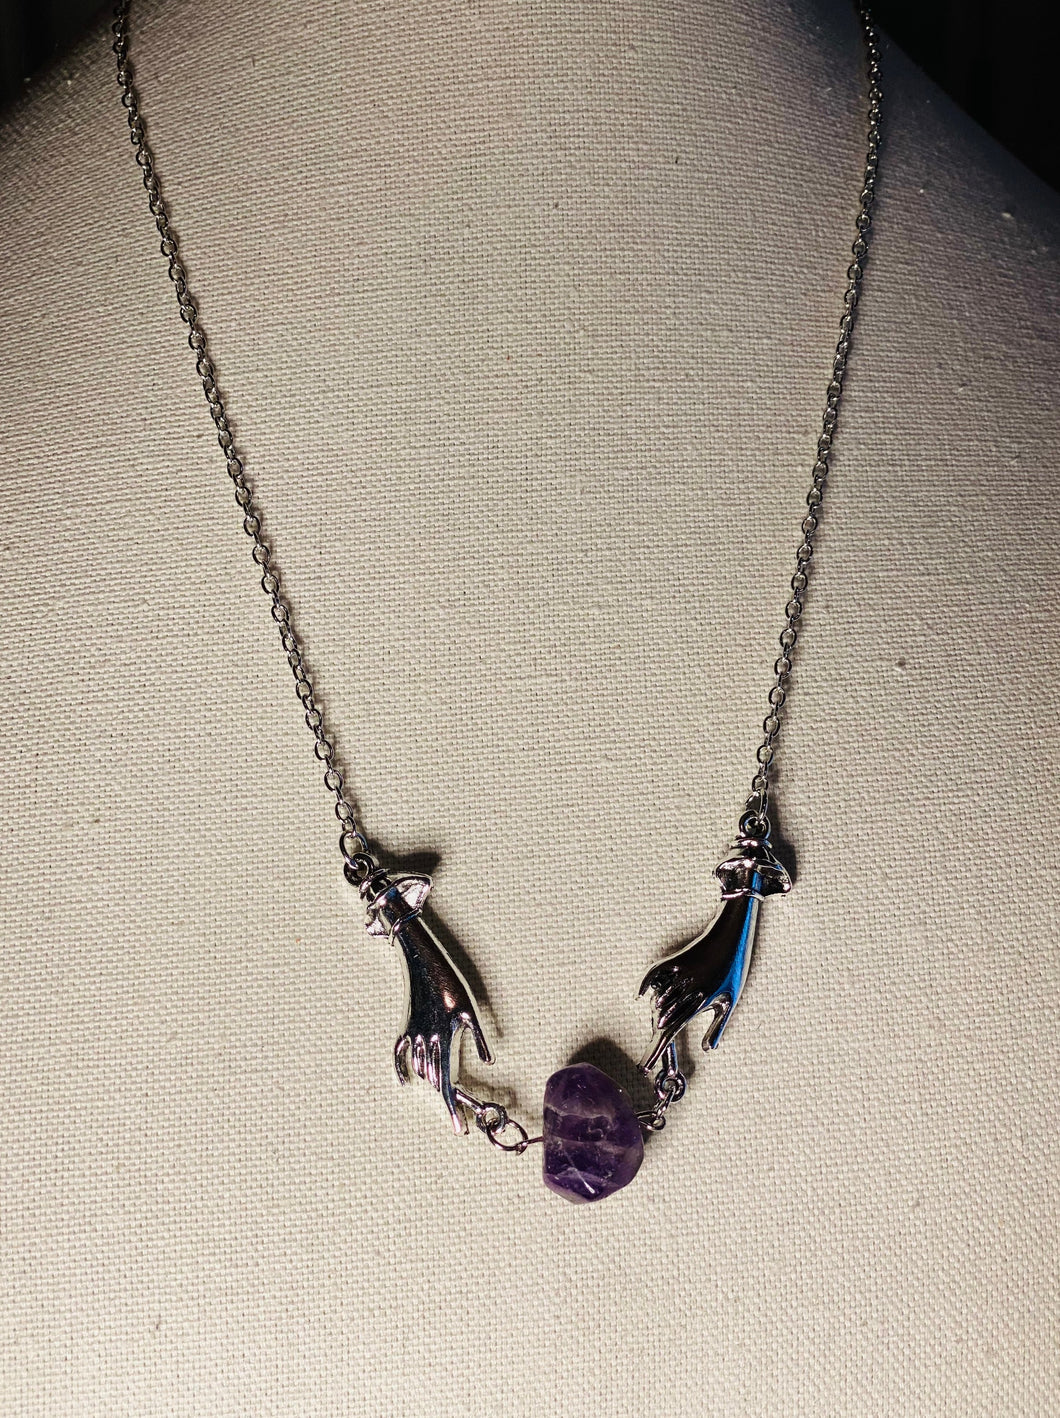 Amethyst Crystal Necklace with Hands